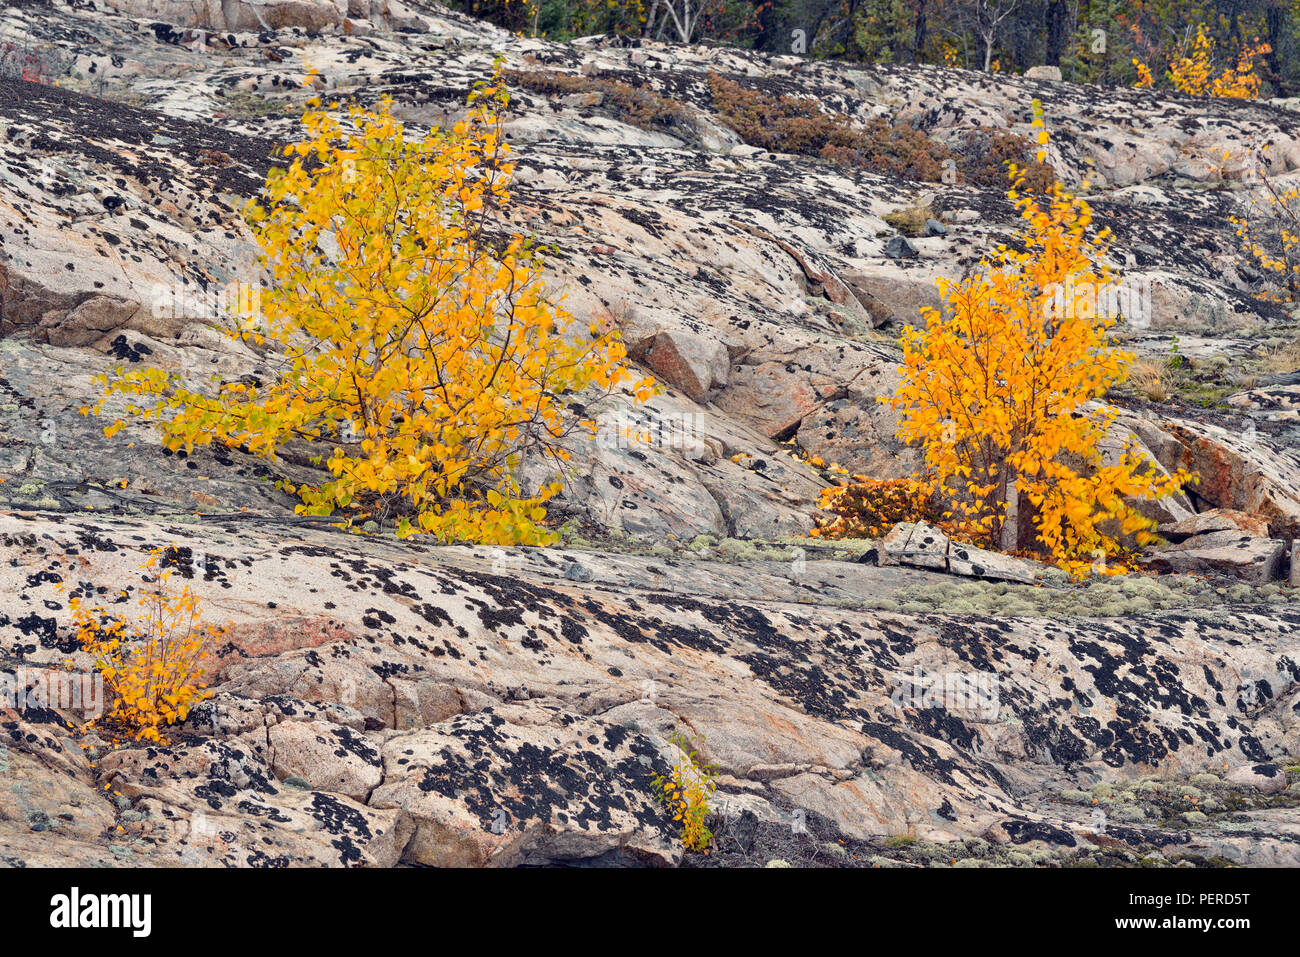 Autumn aspens and rock outcrops, Yellowknife, Northwest Territories, Canada Stock Photo